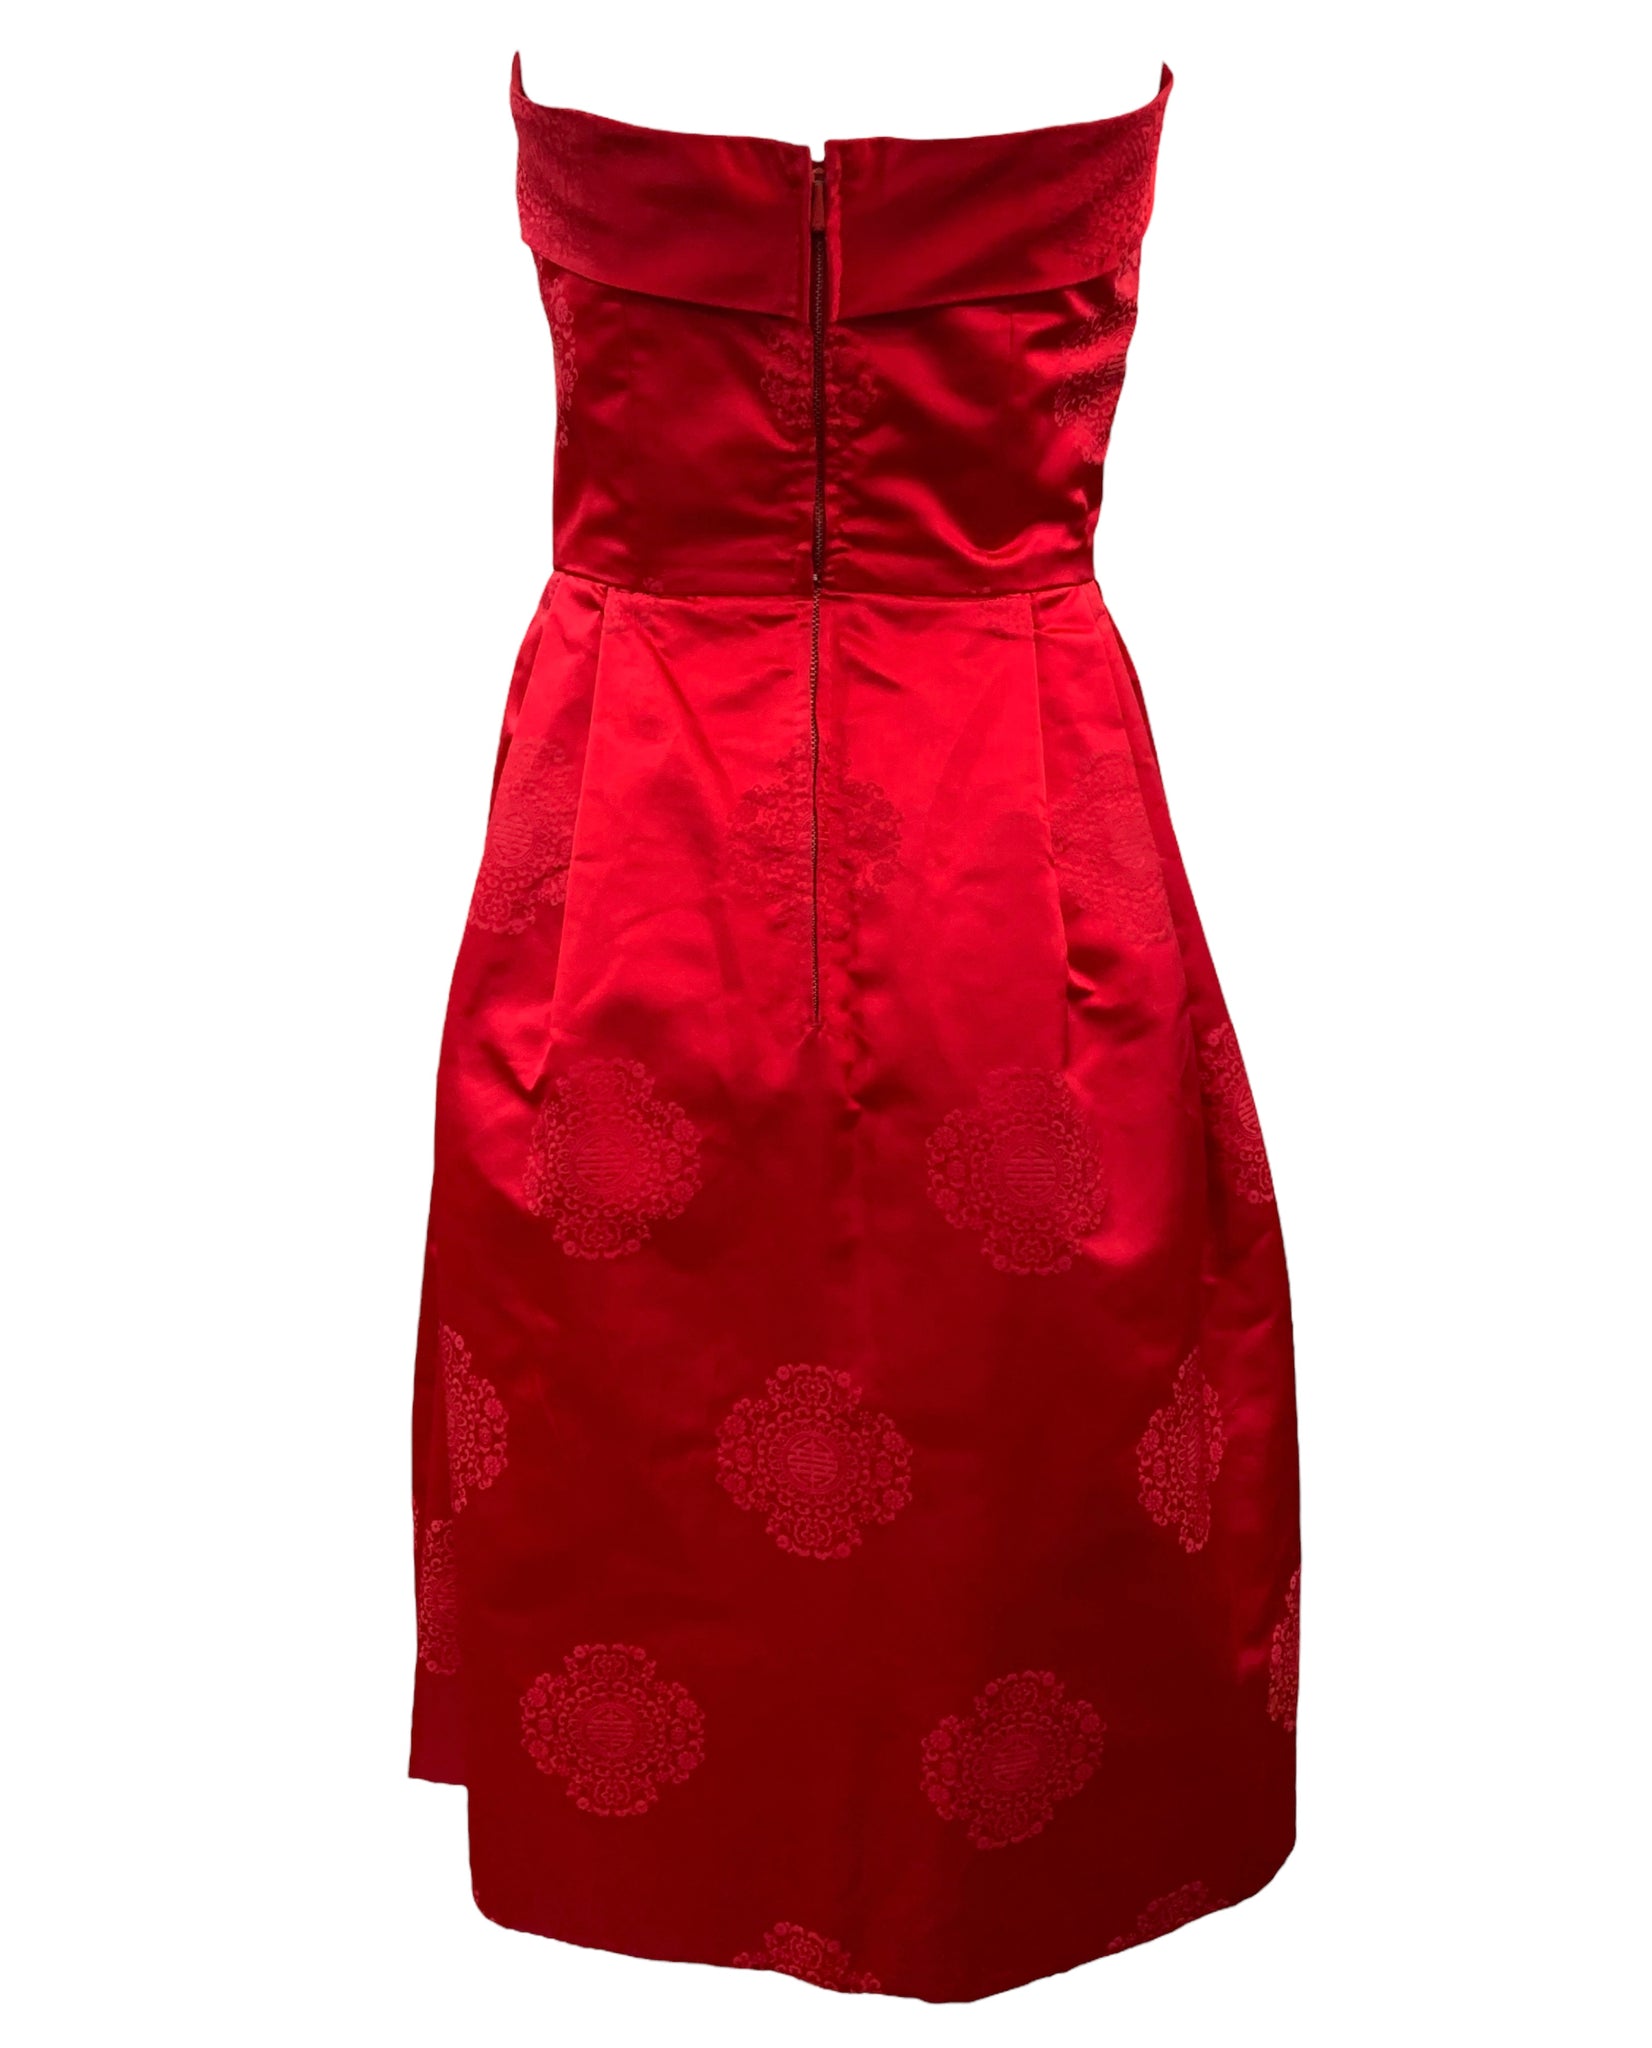 50s Red Satin Strapless Cocktail Dress BACK 3 of 5